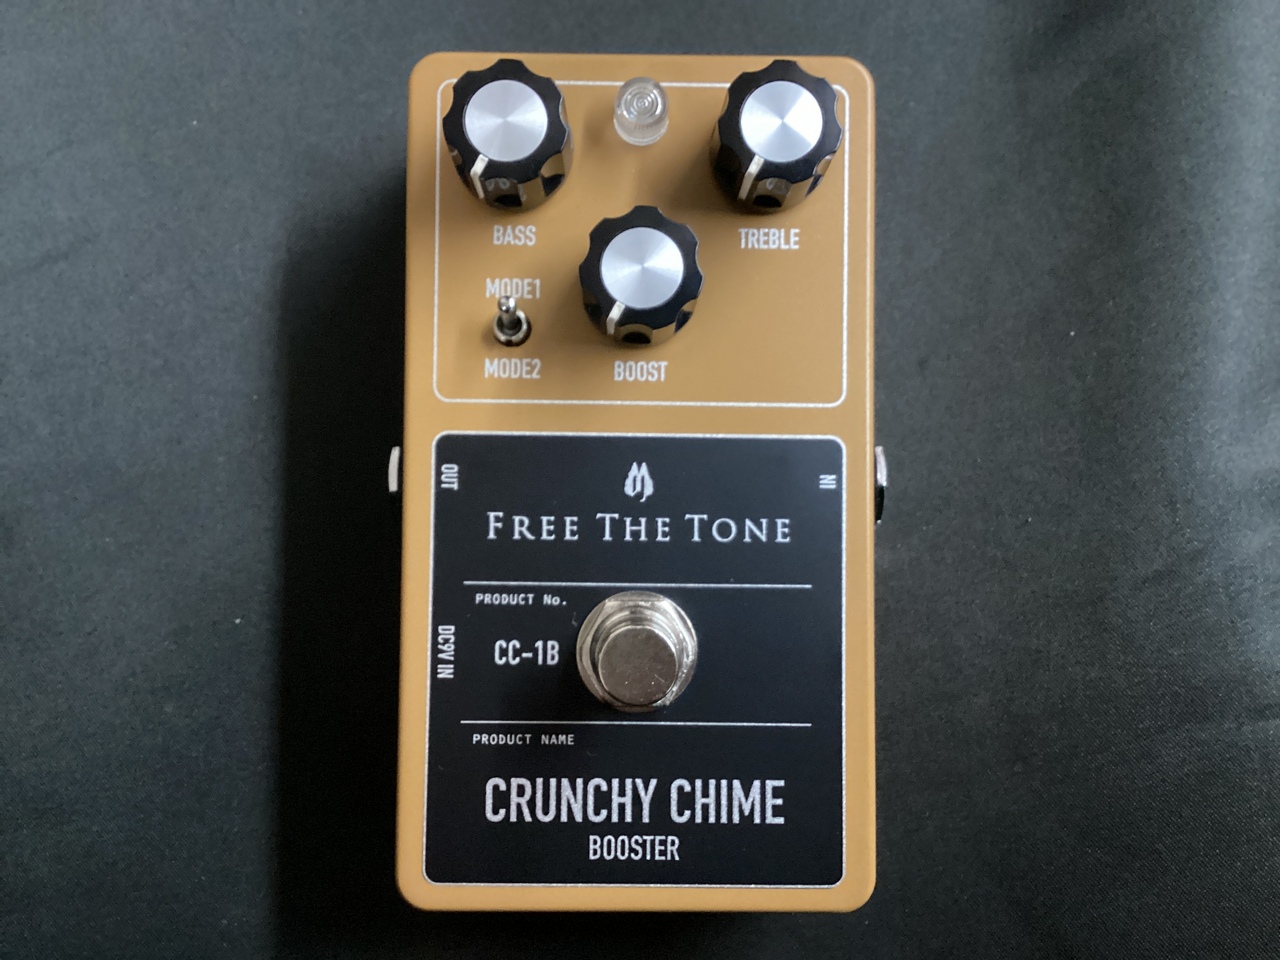 FREE THE TONE CRUNCHY CHIME BOOSTER